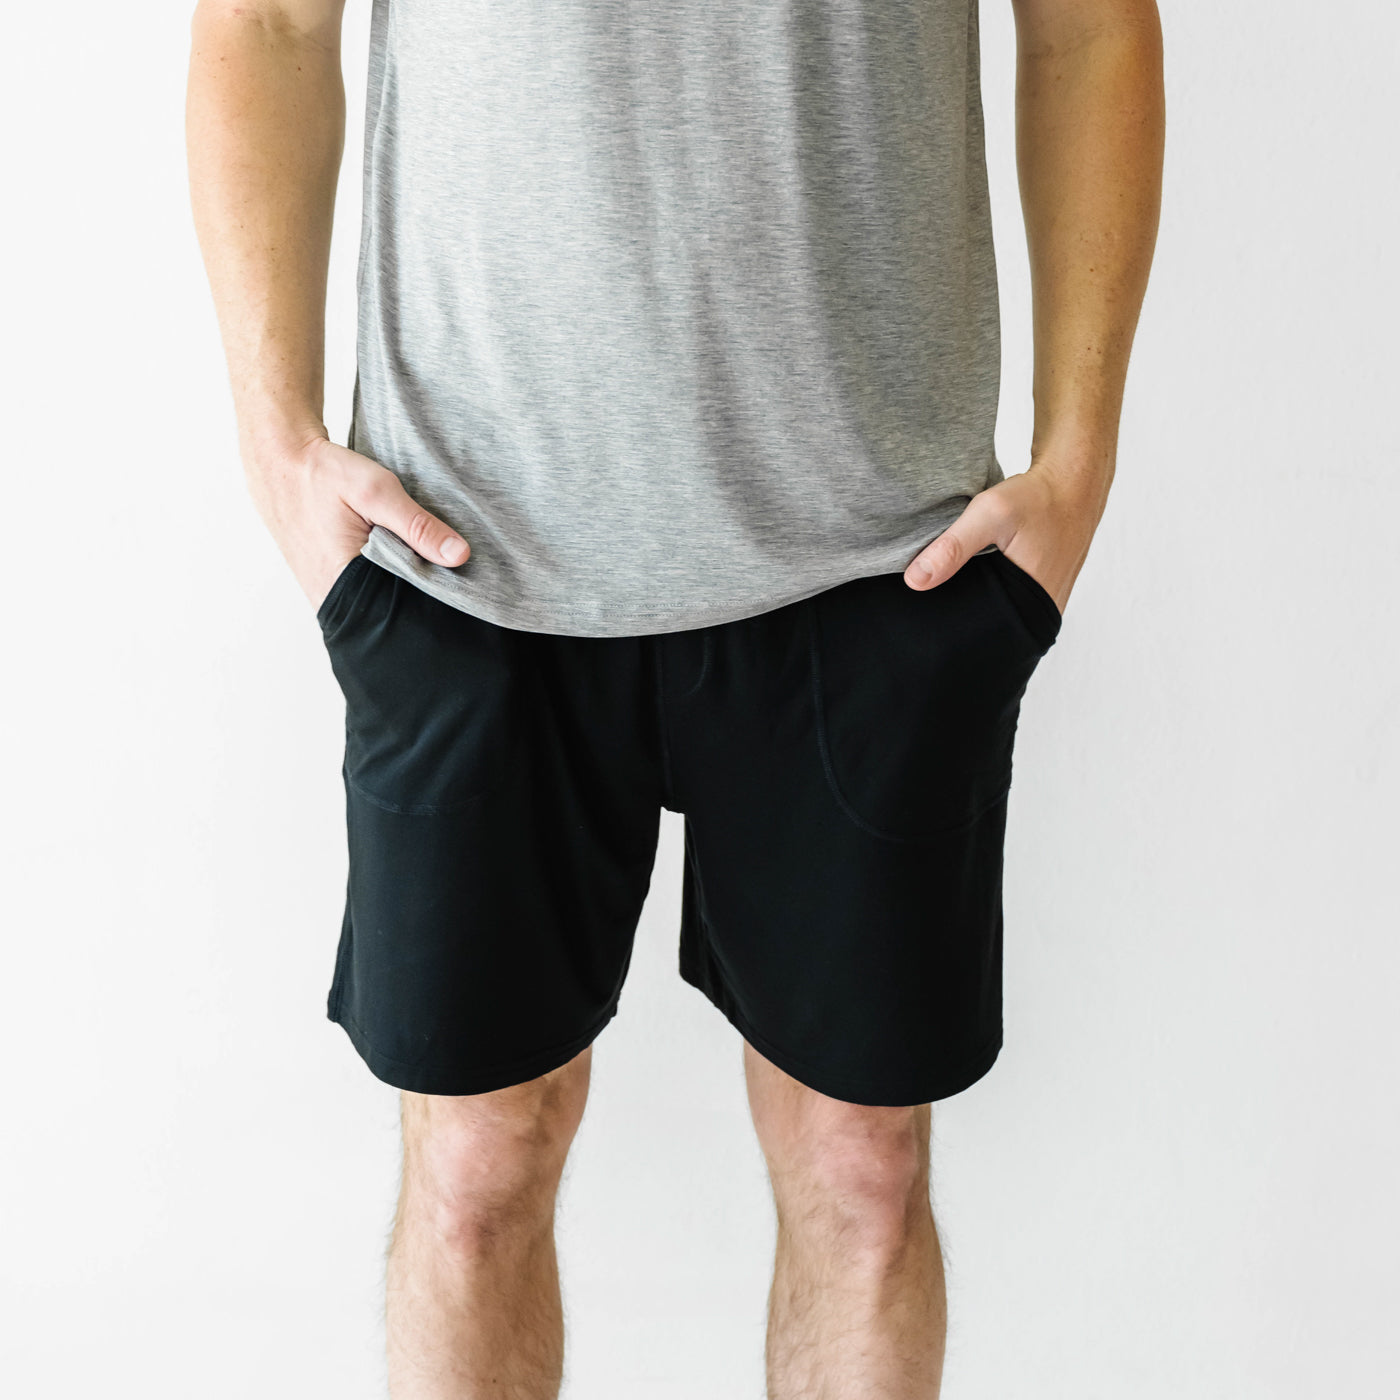 Classic Black Pyjama Shorts By Sheepers